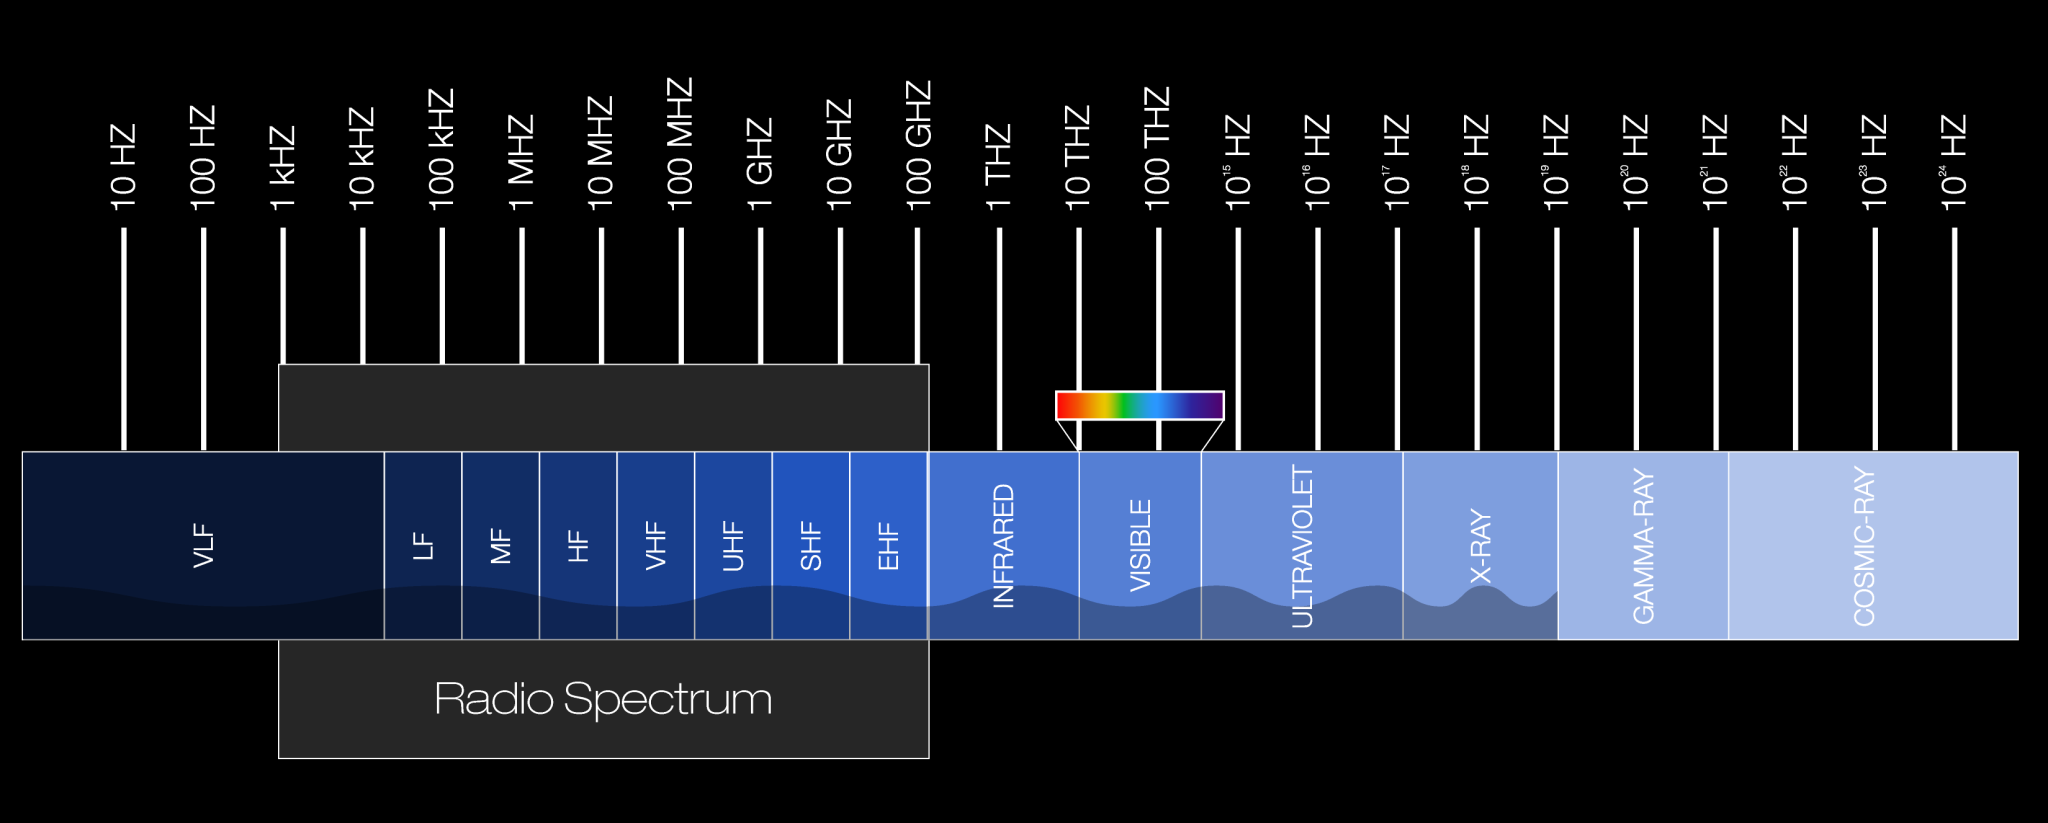 Graphic displaying the bandwidths of the radio spectrum